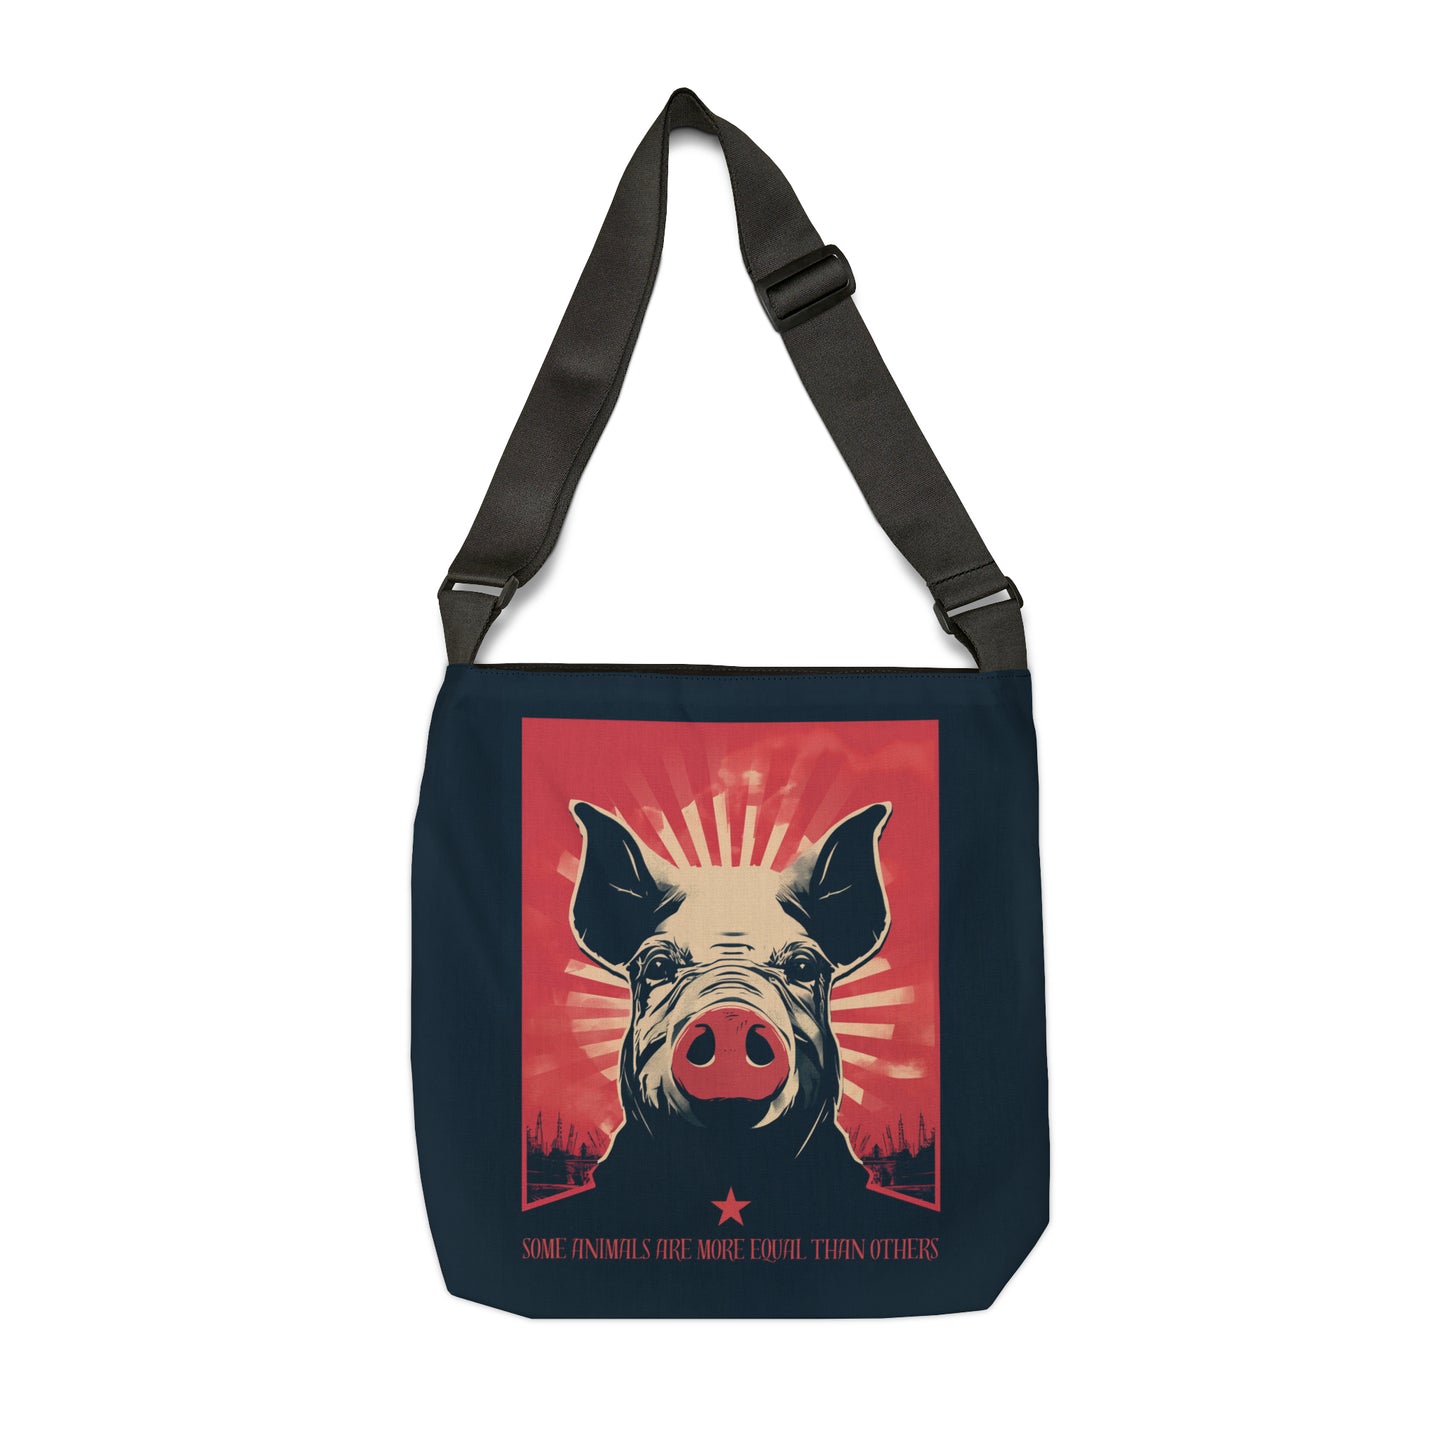 Some Animals Are More Equal Than Others Adjustable Tote Bag (AOP)